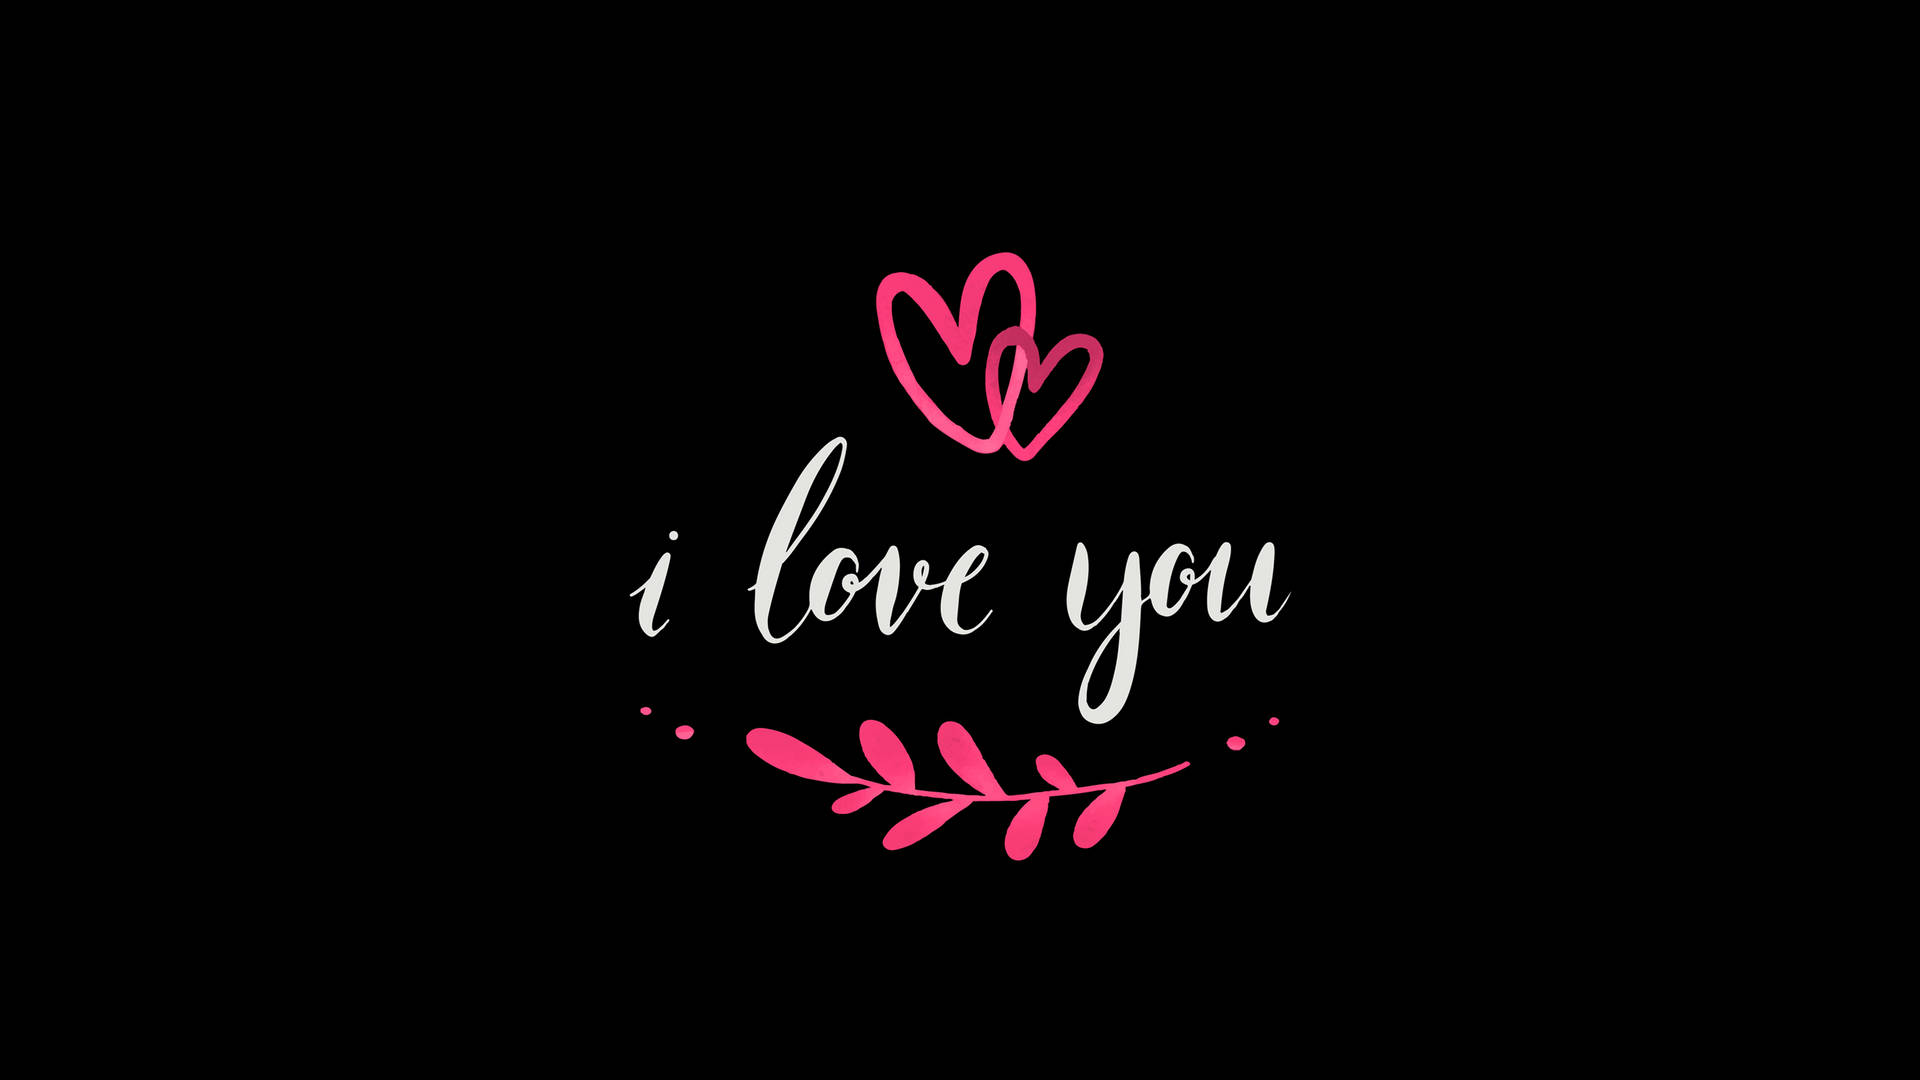 I Love You Pink Hearts Background